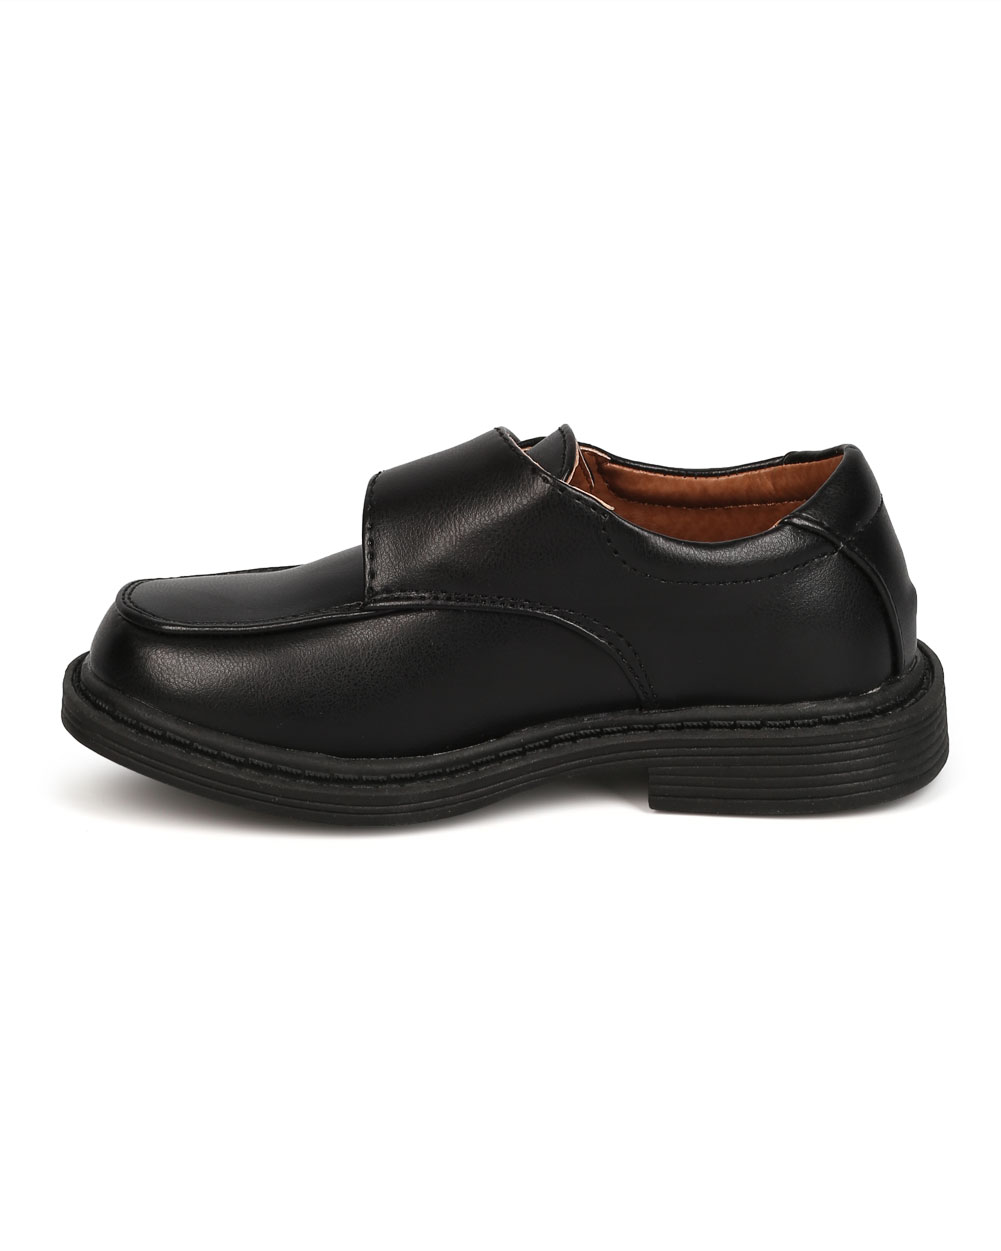 New Boy School Rider Ricky-913F Leatherette Square Toe Banded Dress Shoe - image 4 of 5